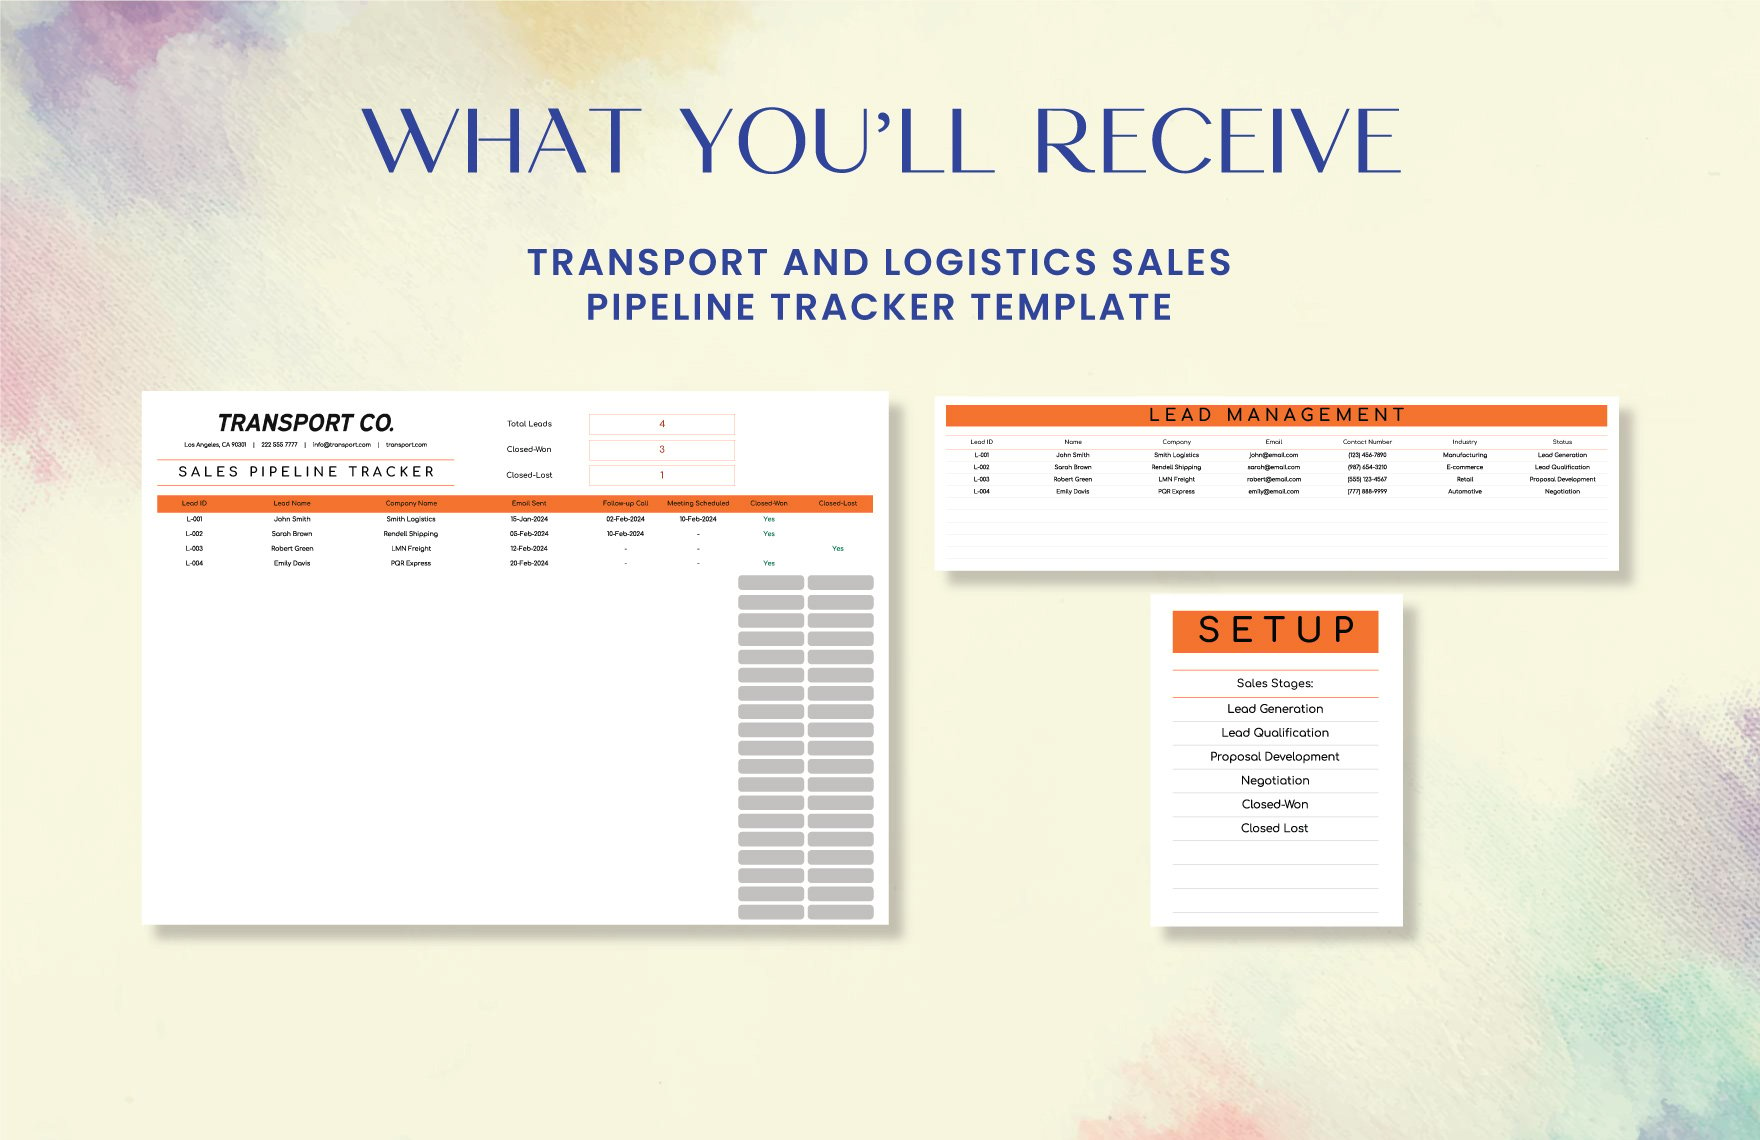 Transport and Logistics Sales Pipeline Tracker Template